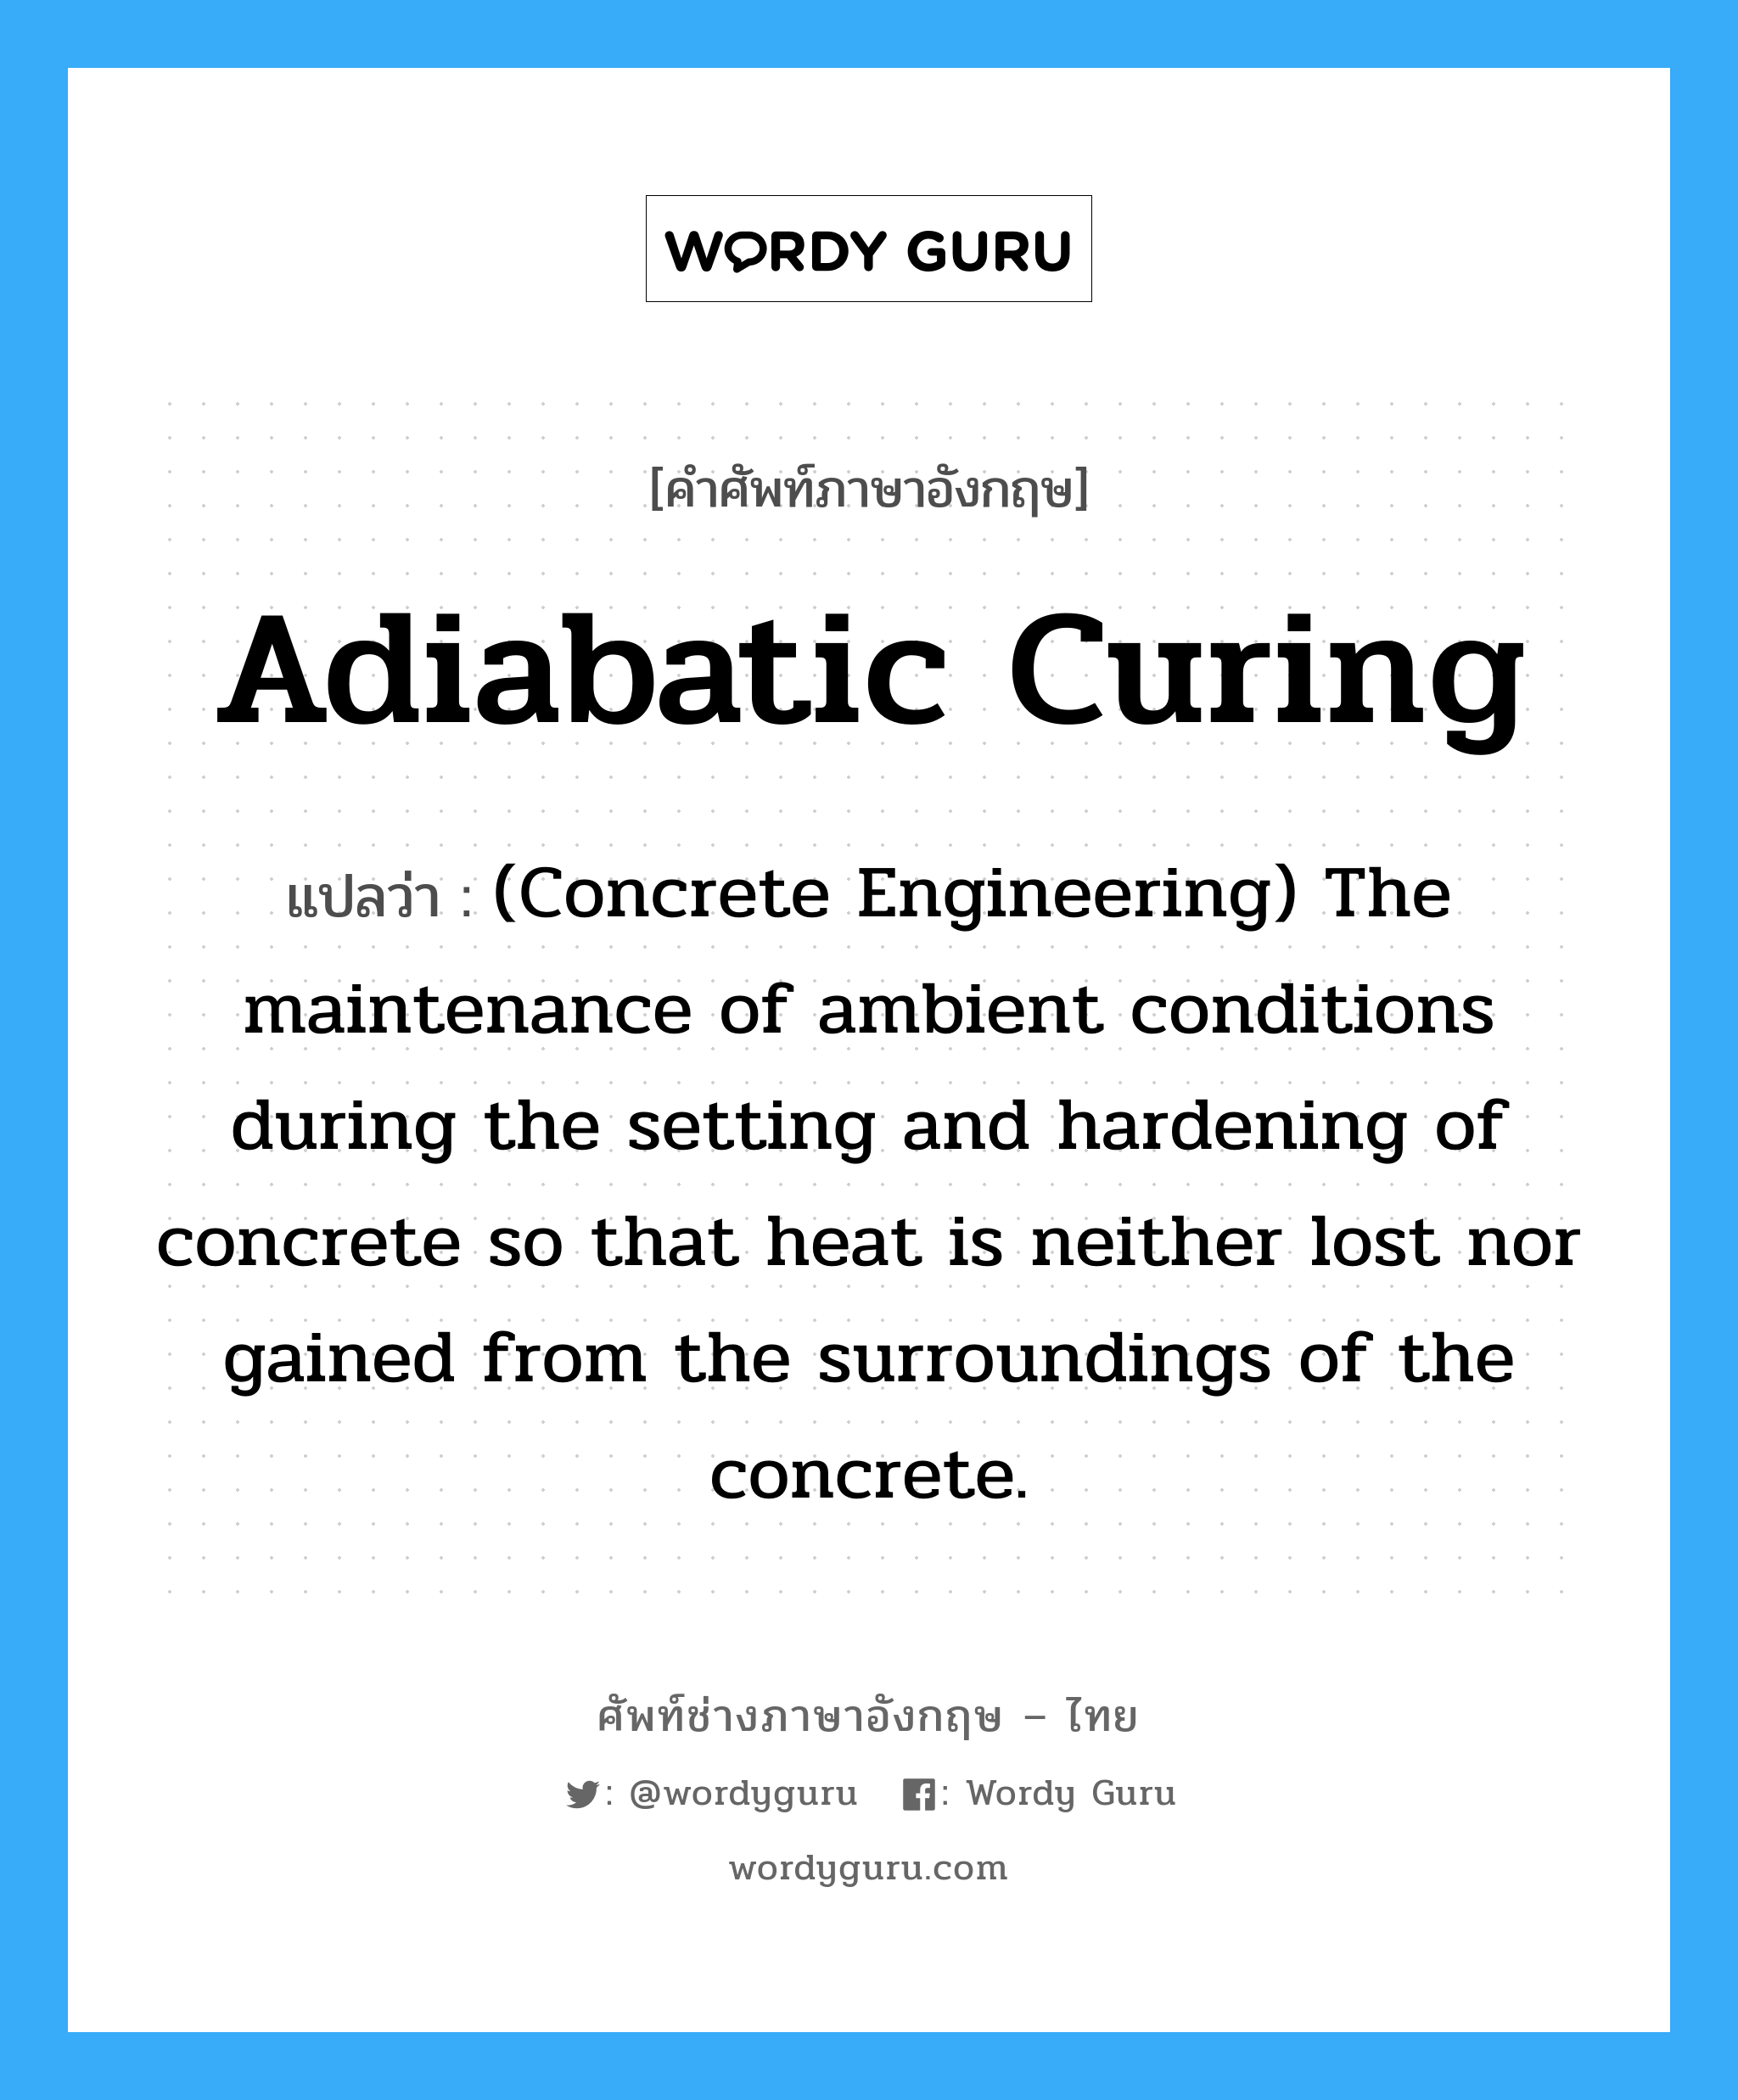 (Concrete Engineering) The maintenance of ambient conditions during the setting and hardening of concrete so that heat is neither lost nor gained from the surroundings of the concrete. ภาษาอังกฤษ?, คำศัพท์ช่างภาษาอังกฤษ - ไทย (Concrete Engineering) The maintenance of ambient conditions during the setting and hardening of concrete so that heat is neither lost nor gained from the surroundings of the concrete. คำศัพท์ภาษาอังกฤษ (Concrete Engineering) The maintenance of ambient conditions during the setting and hardening of concrete so that heat is neither lost nor gained from the surroundings of the concrete. แปลว่า Adiabatic Curing